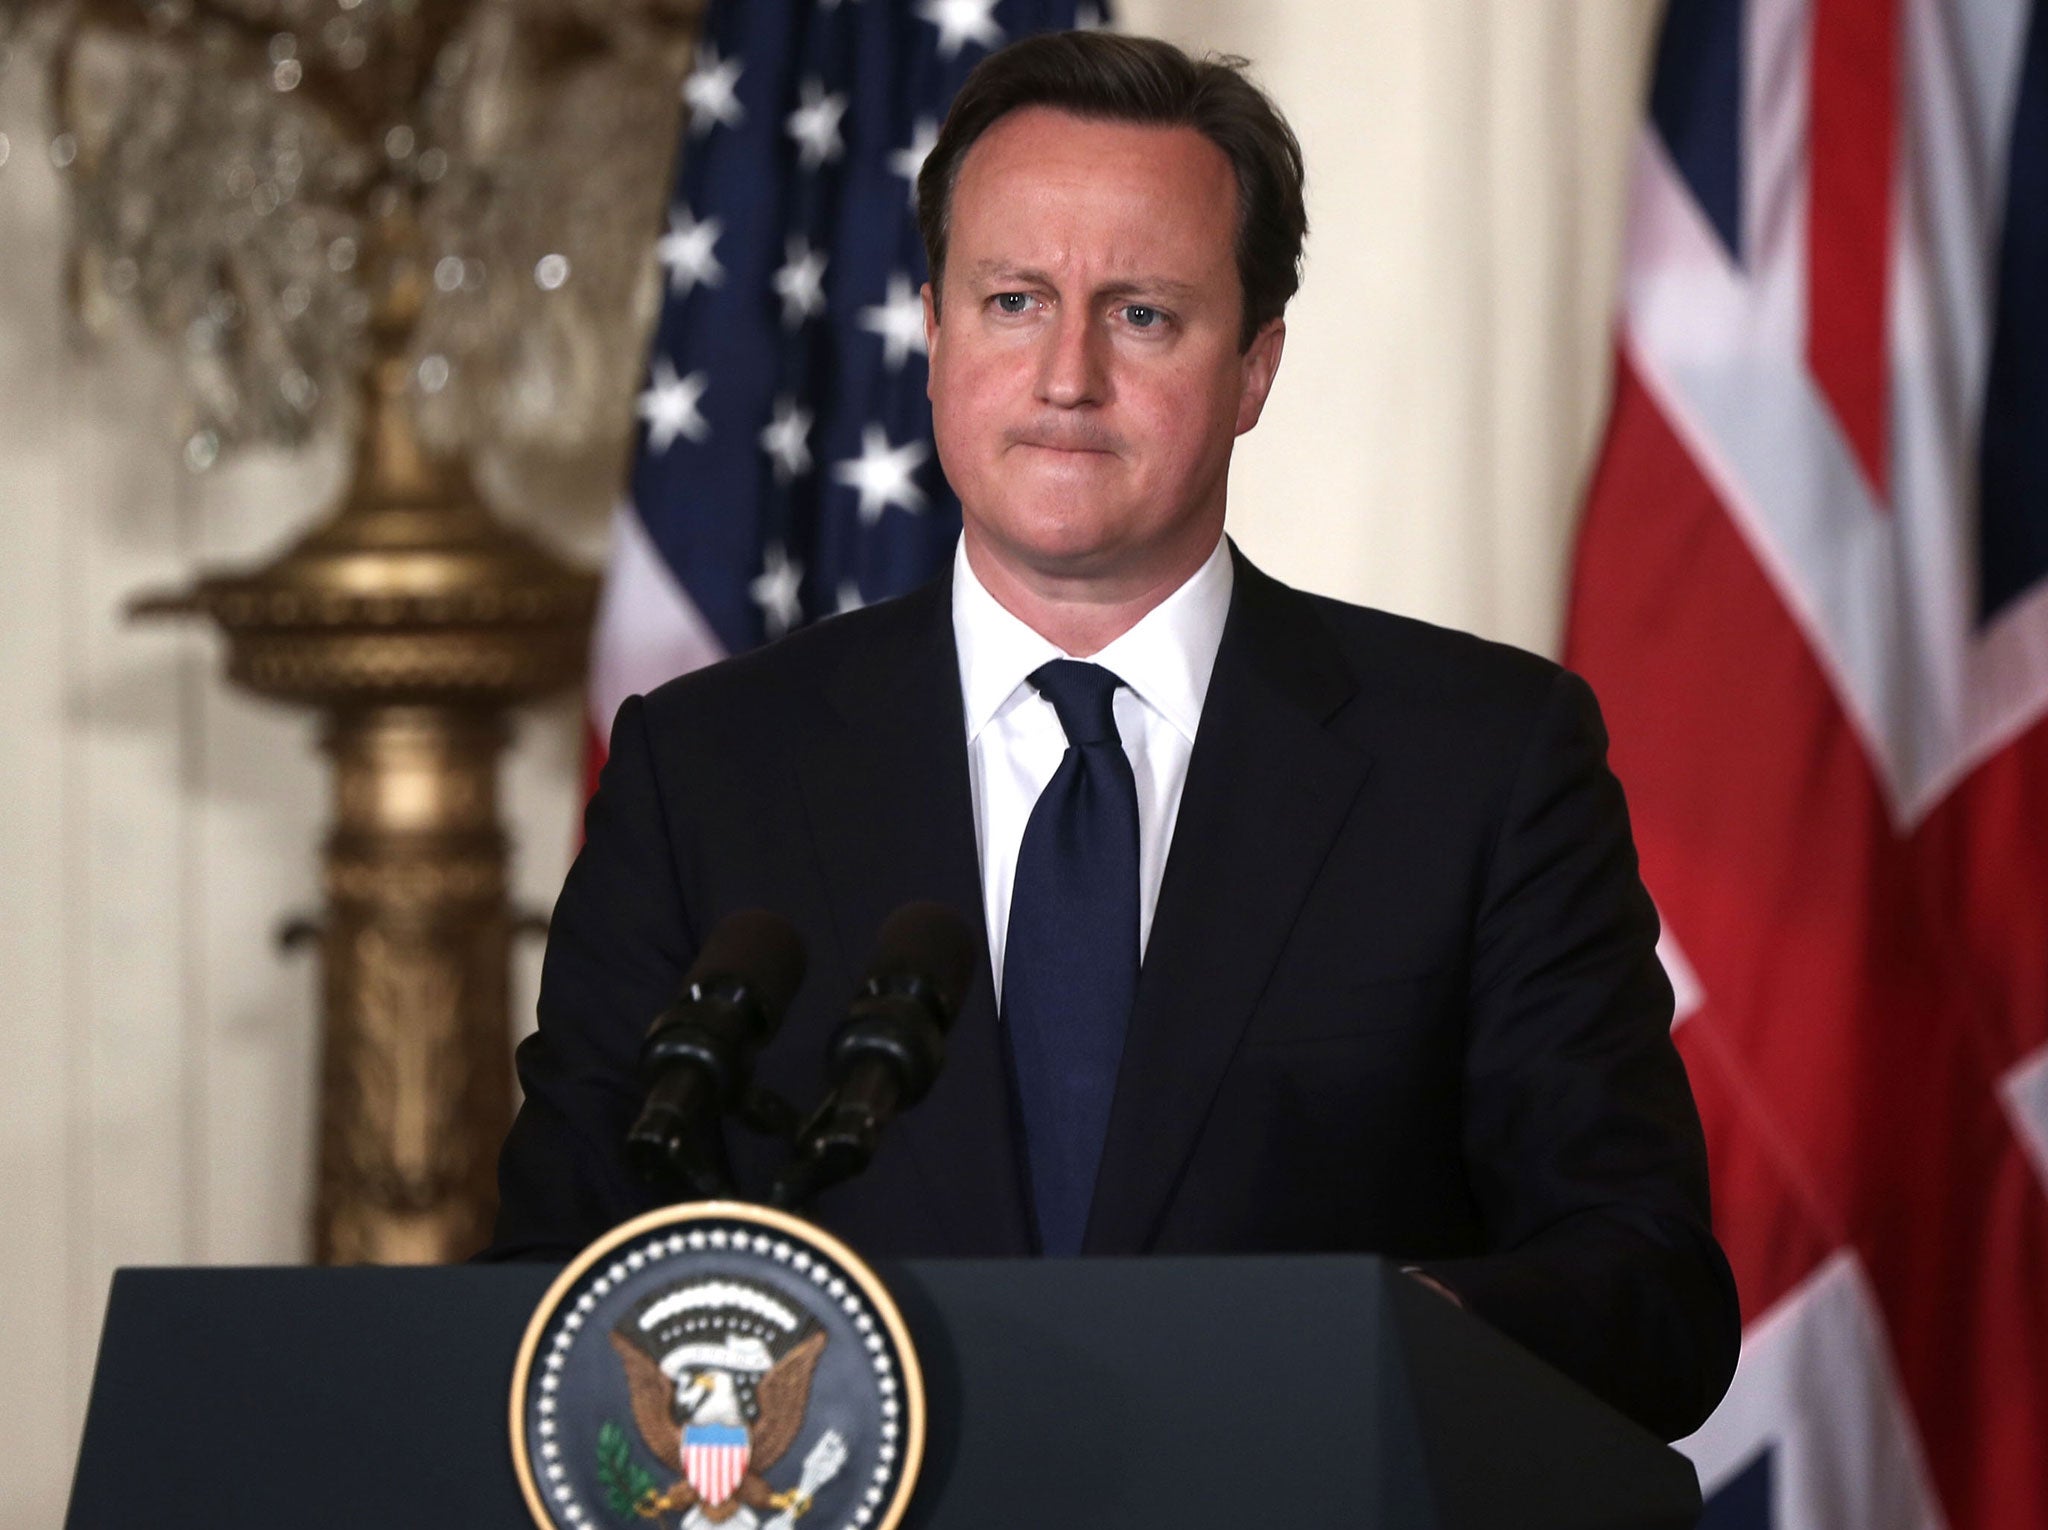 British Prime Minister David Cameron pauses during a joint news conference with U.S. President Barack Obama in the East Room of the White House May 13, 2013 in Washington, DC.